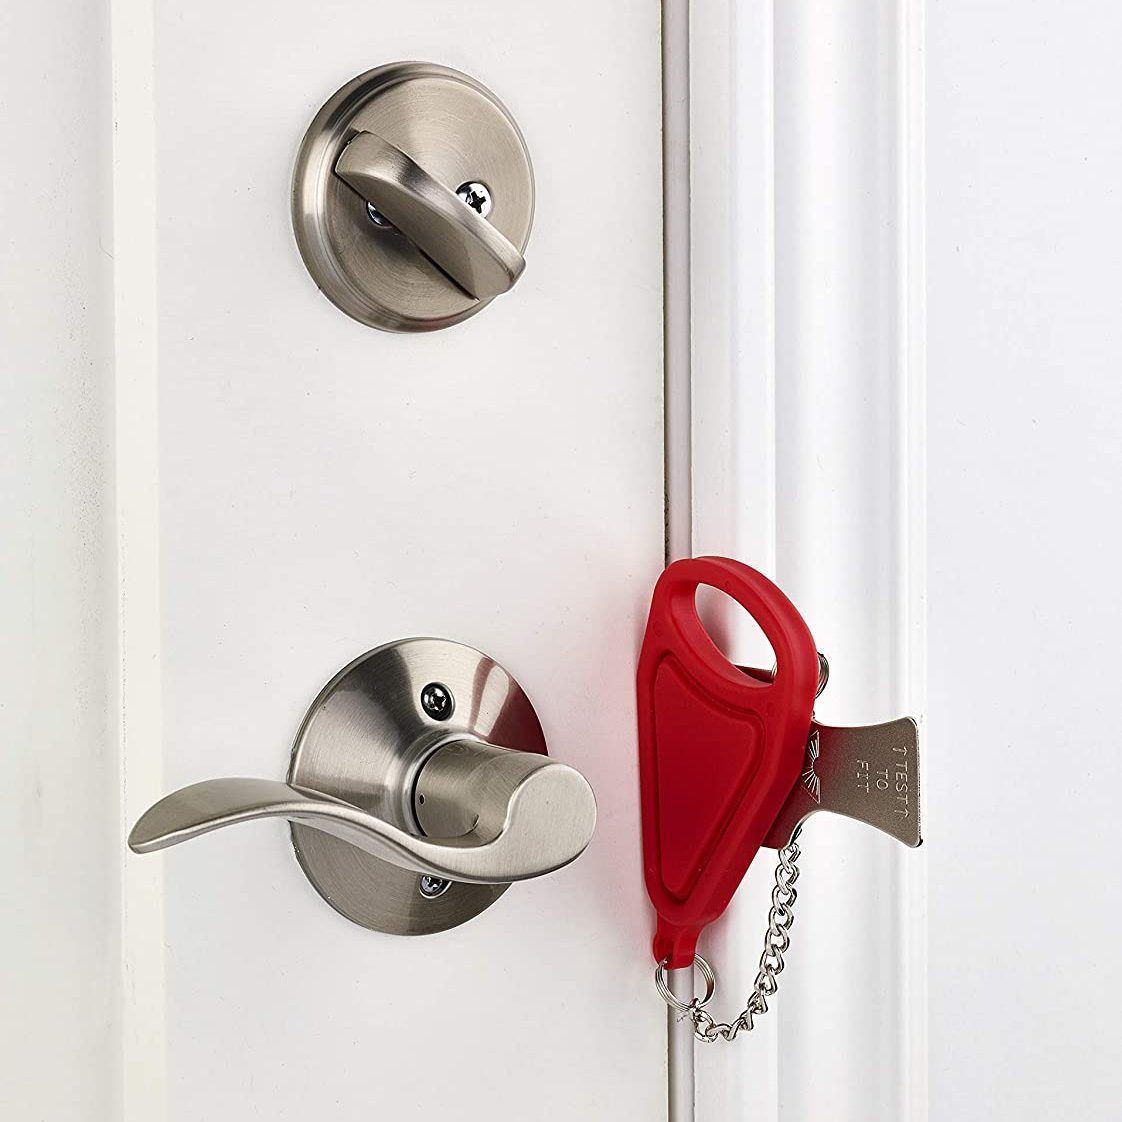 How To Lock a Door Without Using a Lock